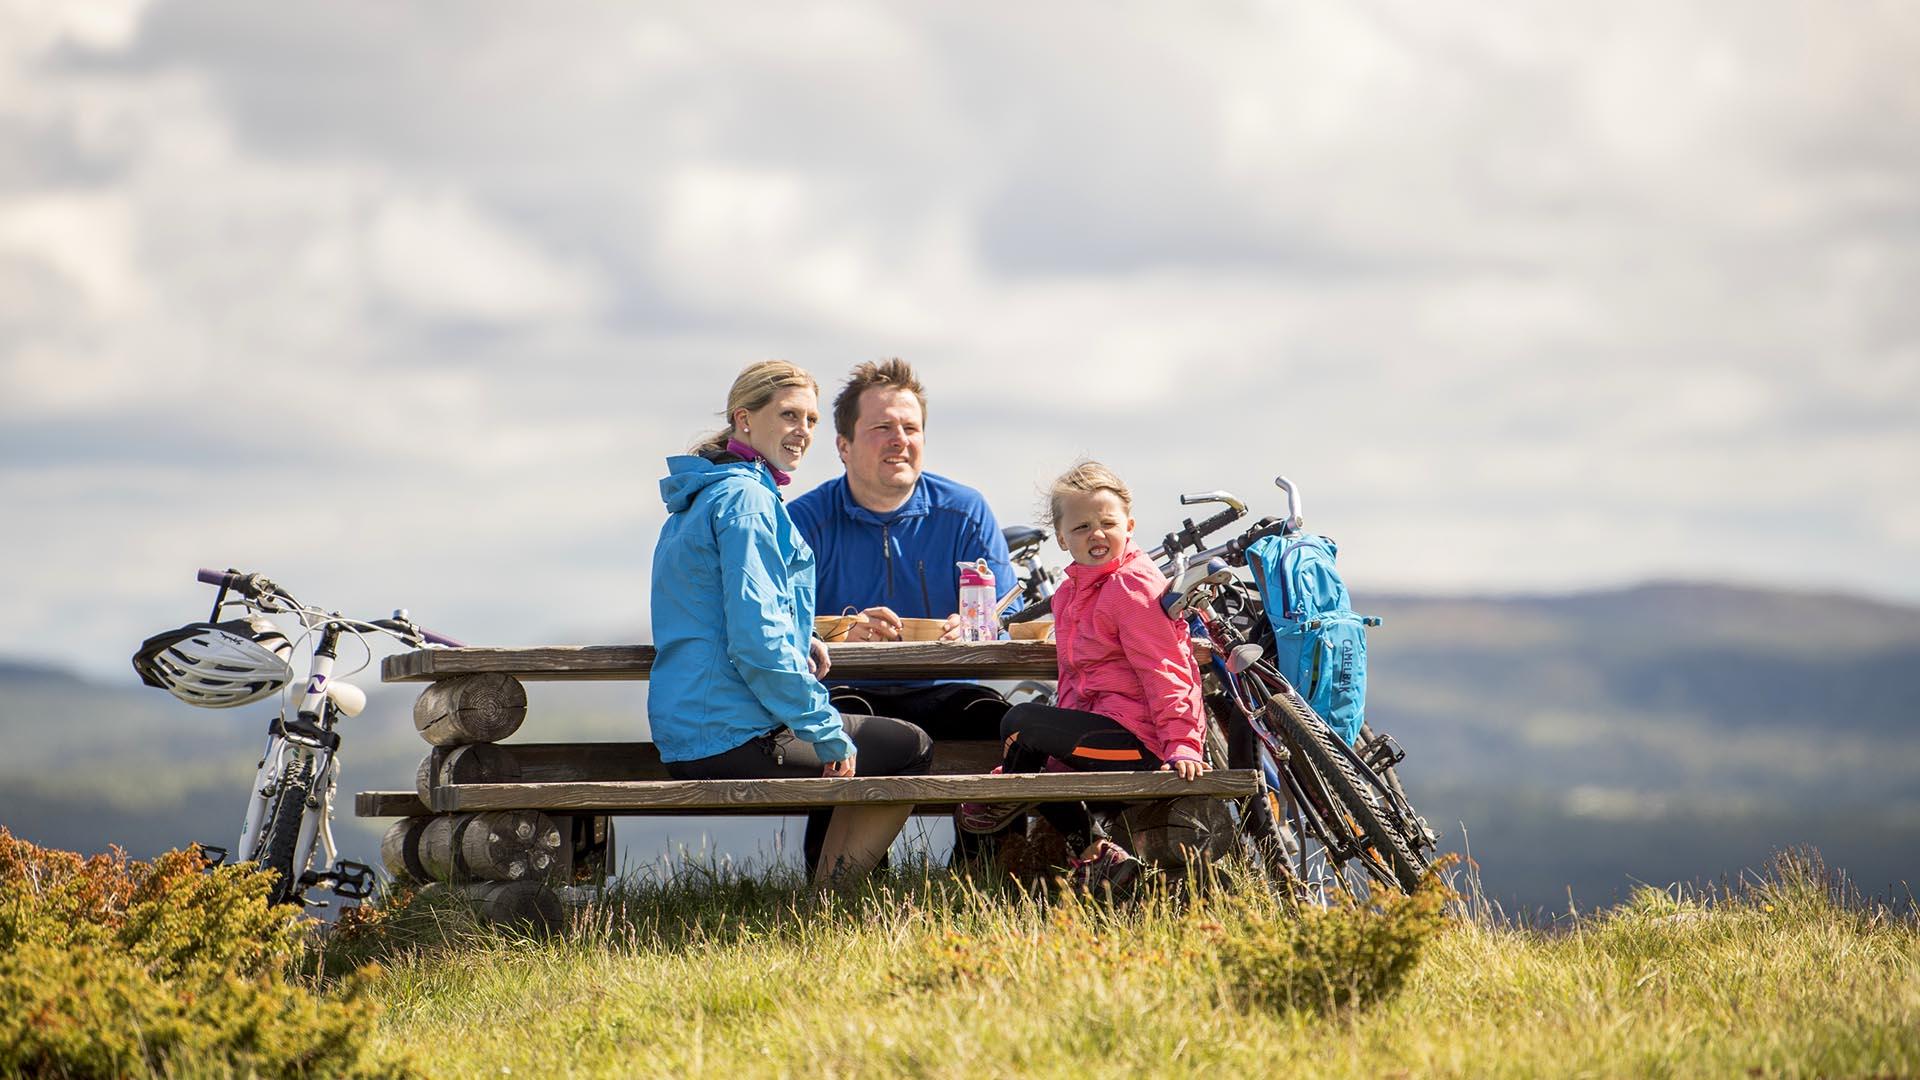 A family has a break on a cycling trip at a resting area with table and benches in the mountains.